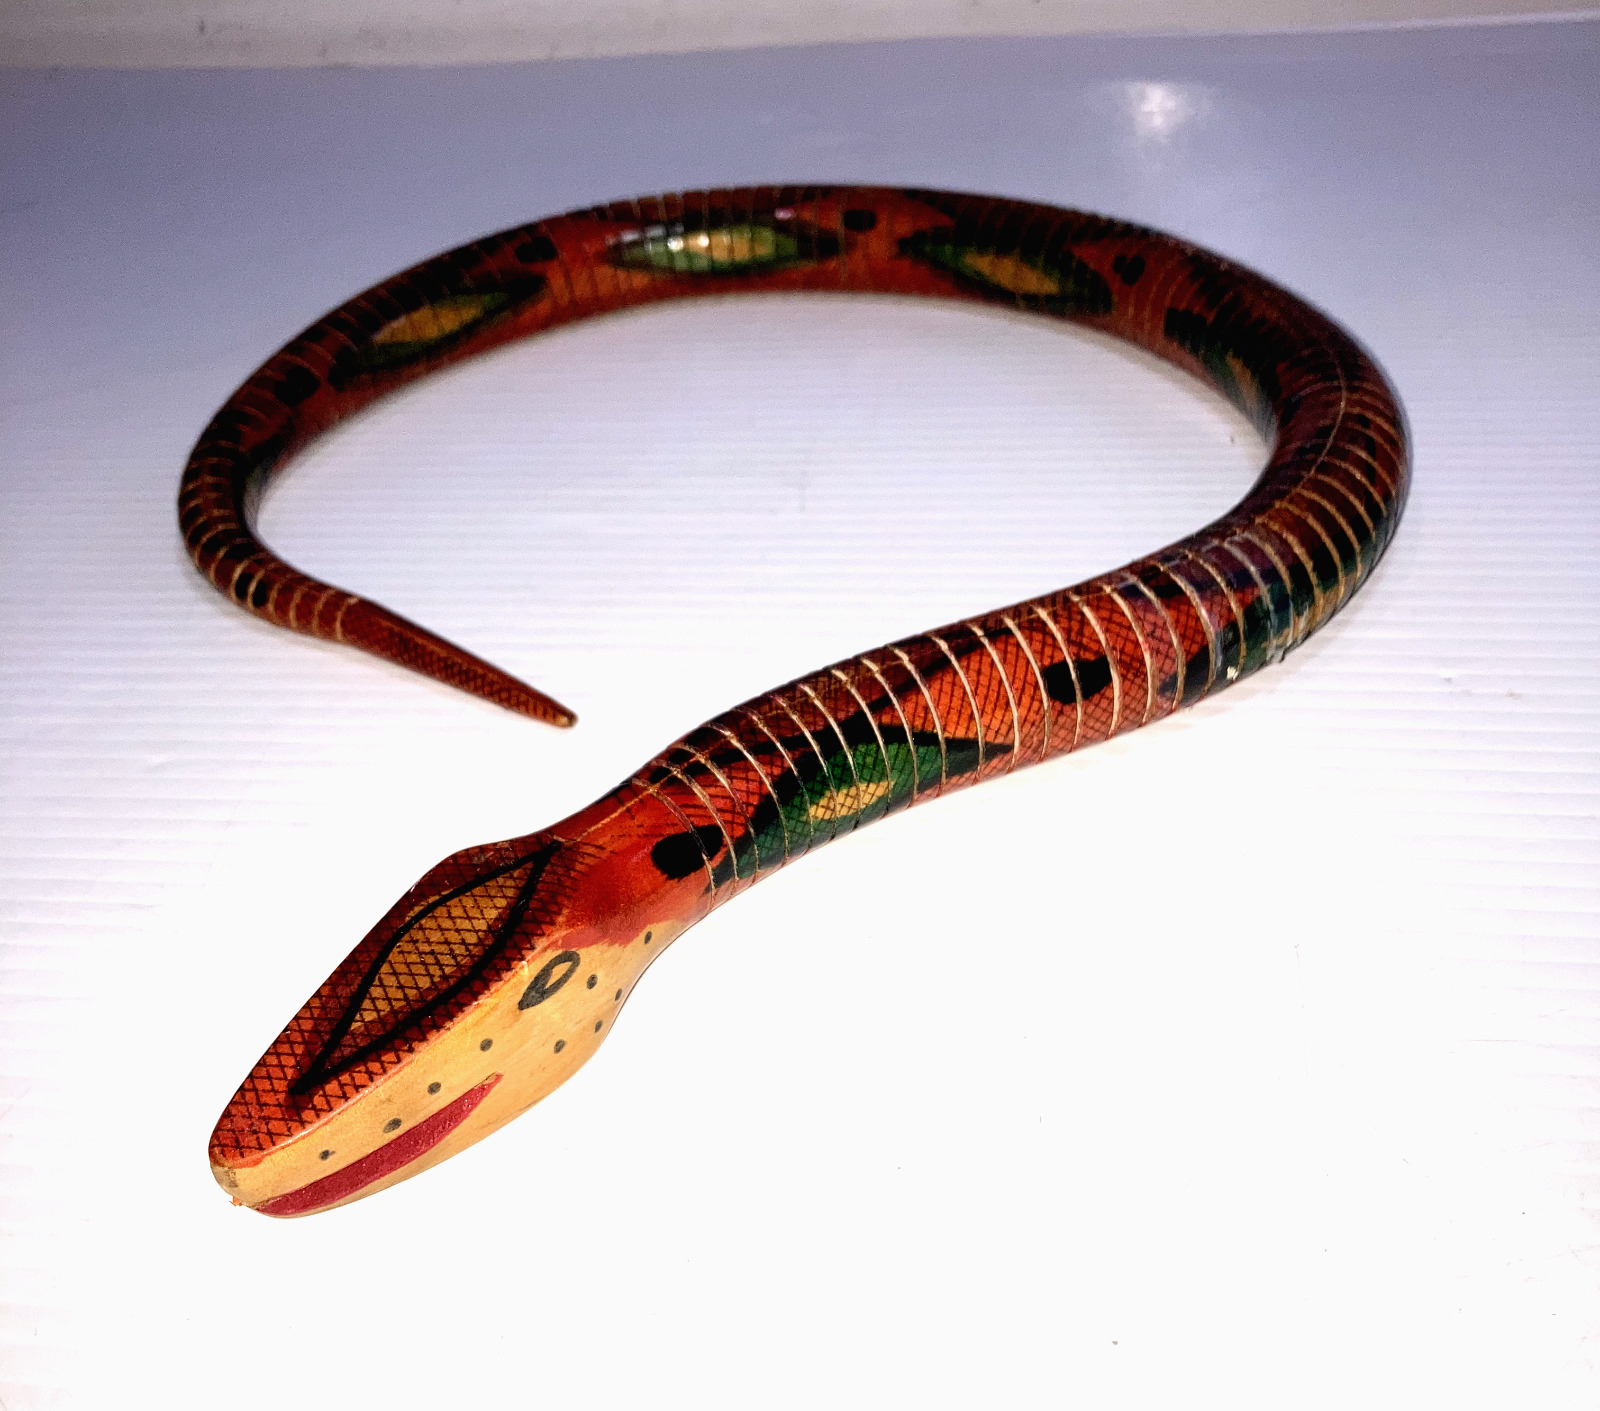 Wooden Articulated Jointed Snake 31” Hand Painted